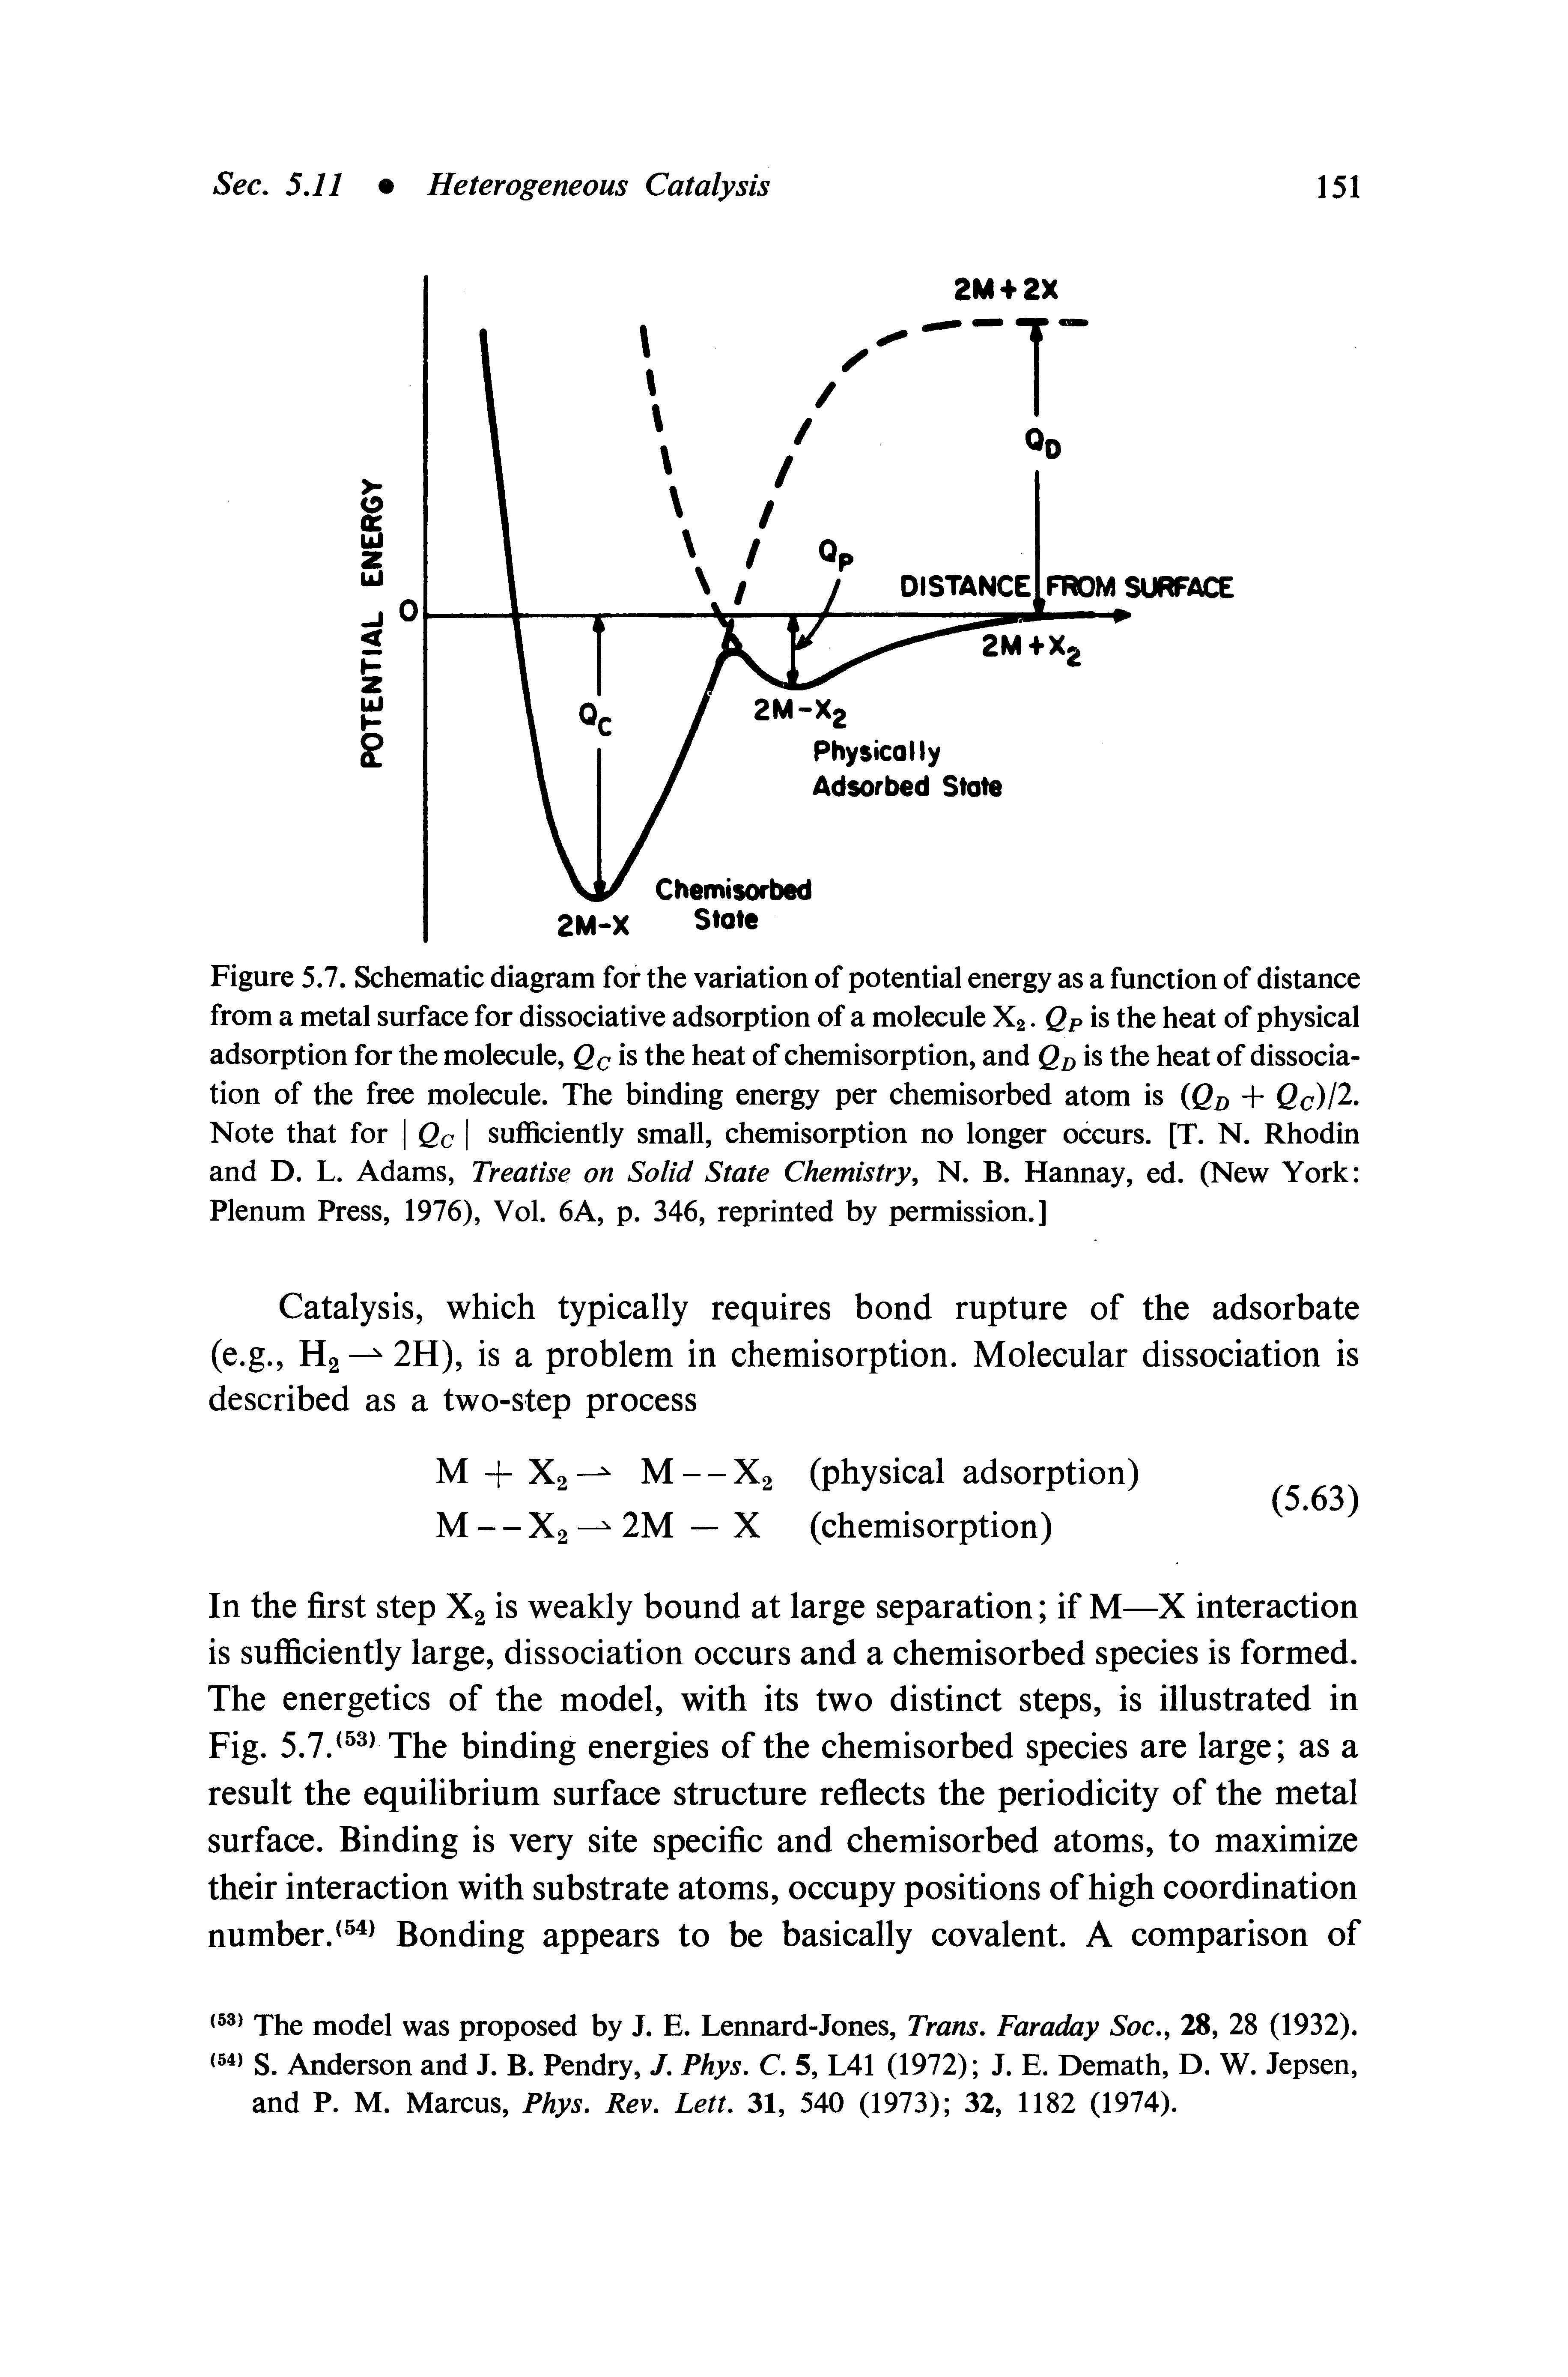 Figure 5.7. Schematic diagram for the variation of potential energy as a function of distance from a metal surface for dissociative adsorption of a molecule X2. 6p is the heat of physical adsorption for the molecule, Qc is the heat of chemisorption, and Qp is the heat of dissociation of the free molecule. The binding energy per chemisorbed atom is Qn + Qc)l2, Note that for Qc sufficiently small, chemisorption no longer occurs. [T. N. Rhodin and D. L. Adams, Treatise on Solid State Chemistry, N. B. Hannay, ed. (New York Plenum Press, 1976), Vol. 6A, p. 346, reprinted by permission.]...